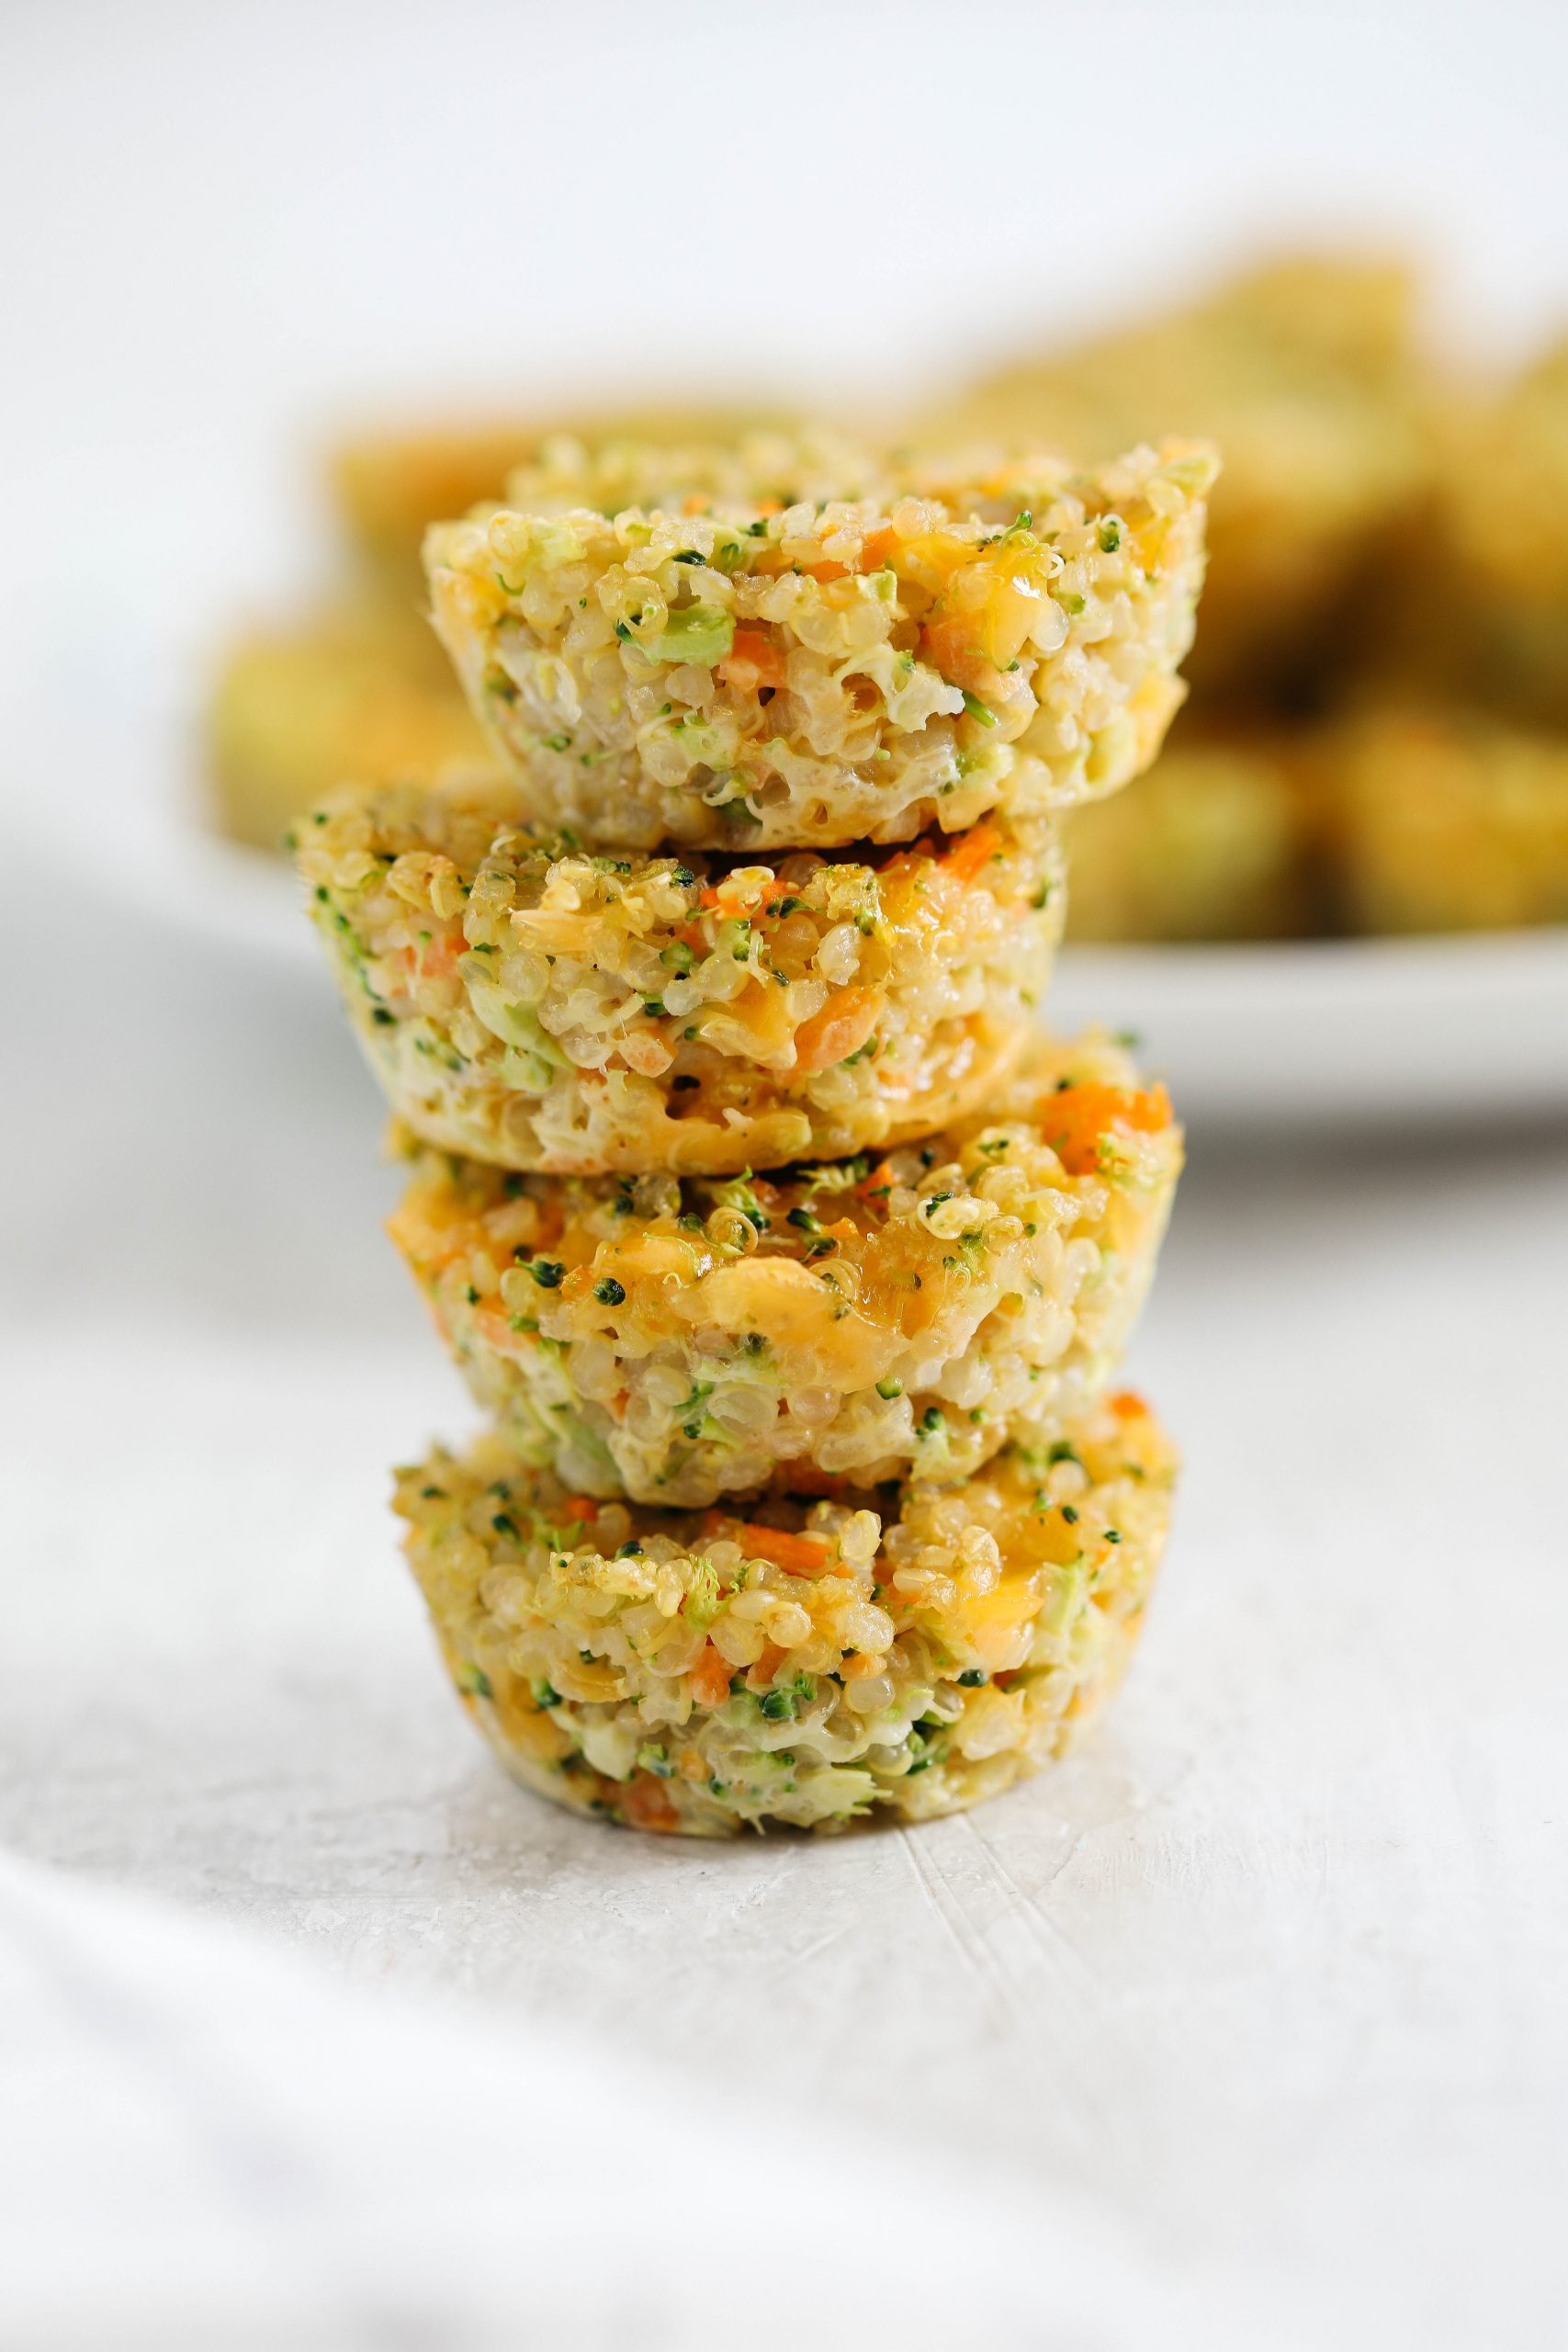 Bite-sized Cheesy Broccoli Quinoa Bites perfect for babies, toddlers and kids that are healthy, packed with protein and easily made with only 5 simple ingredients!